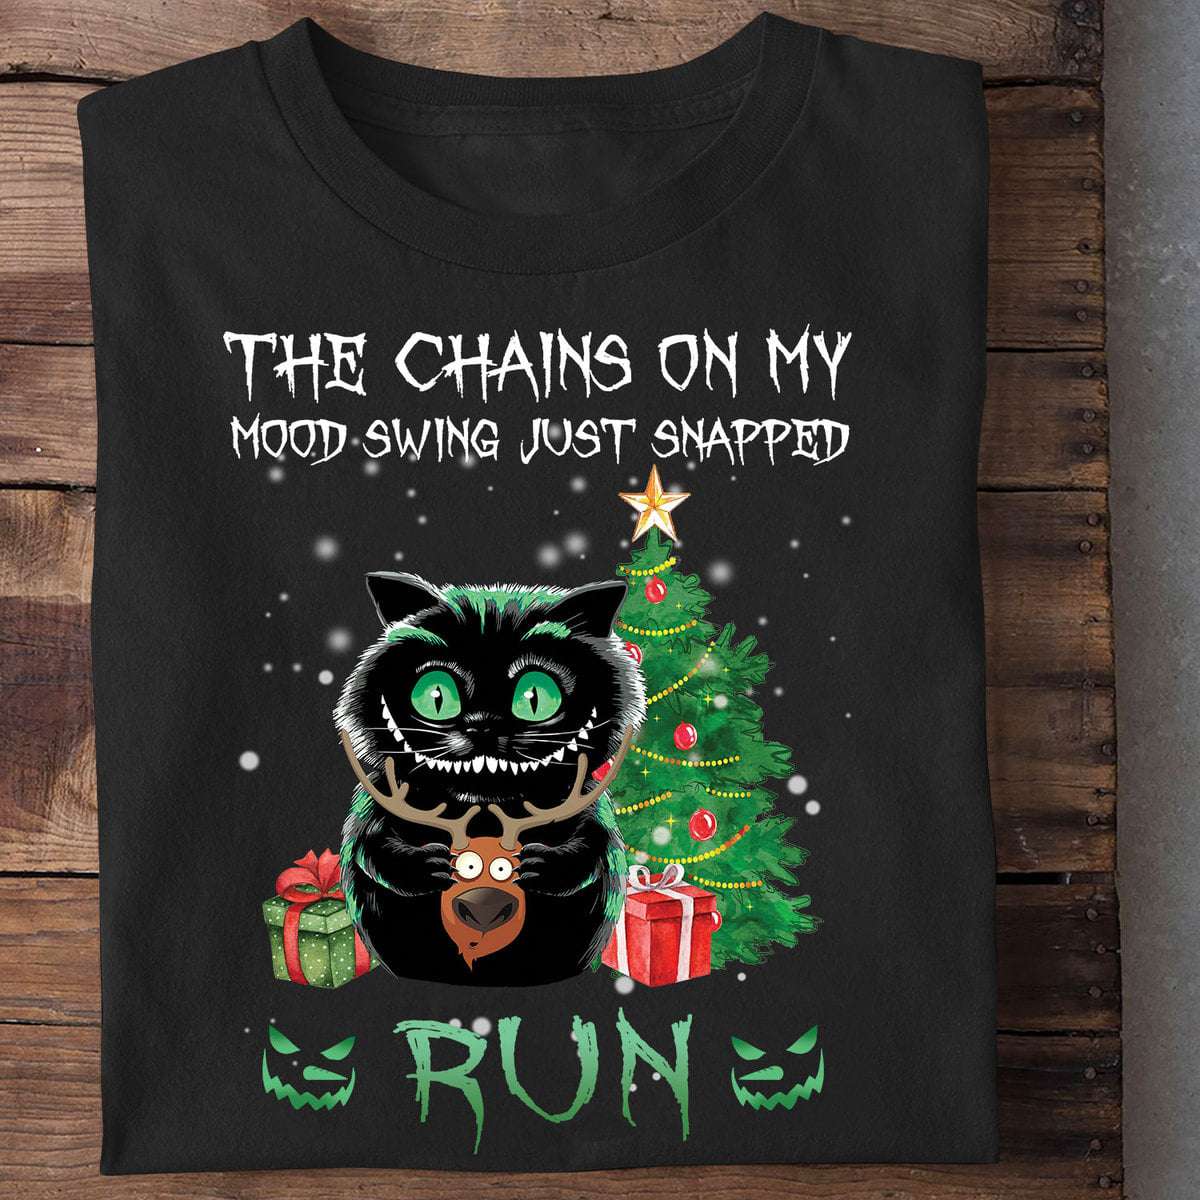 Reindeer Cheshire Cat, Gift Christmas - The chains on my mood swing just snapped run